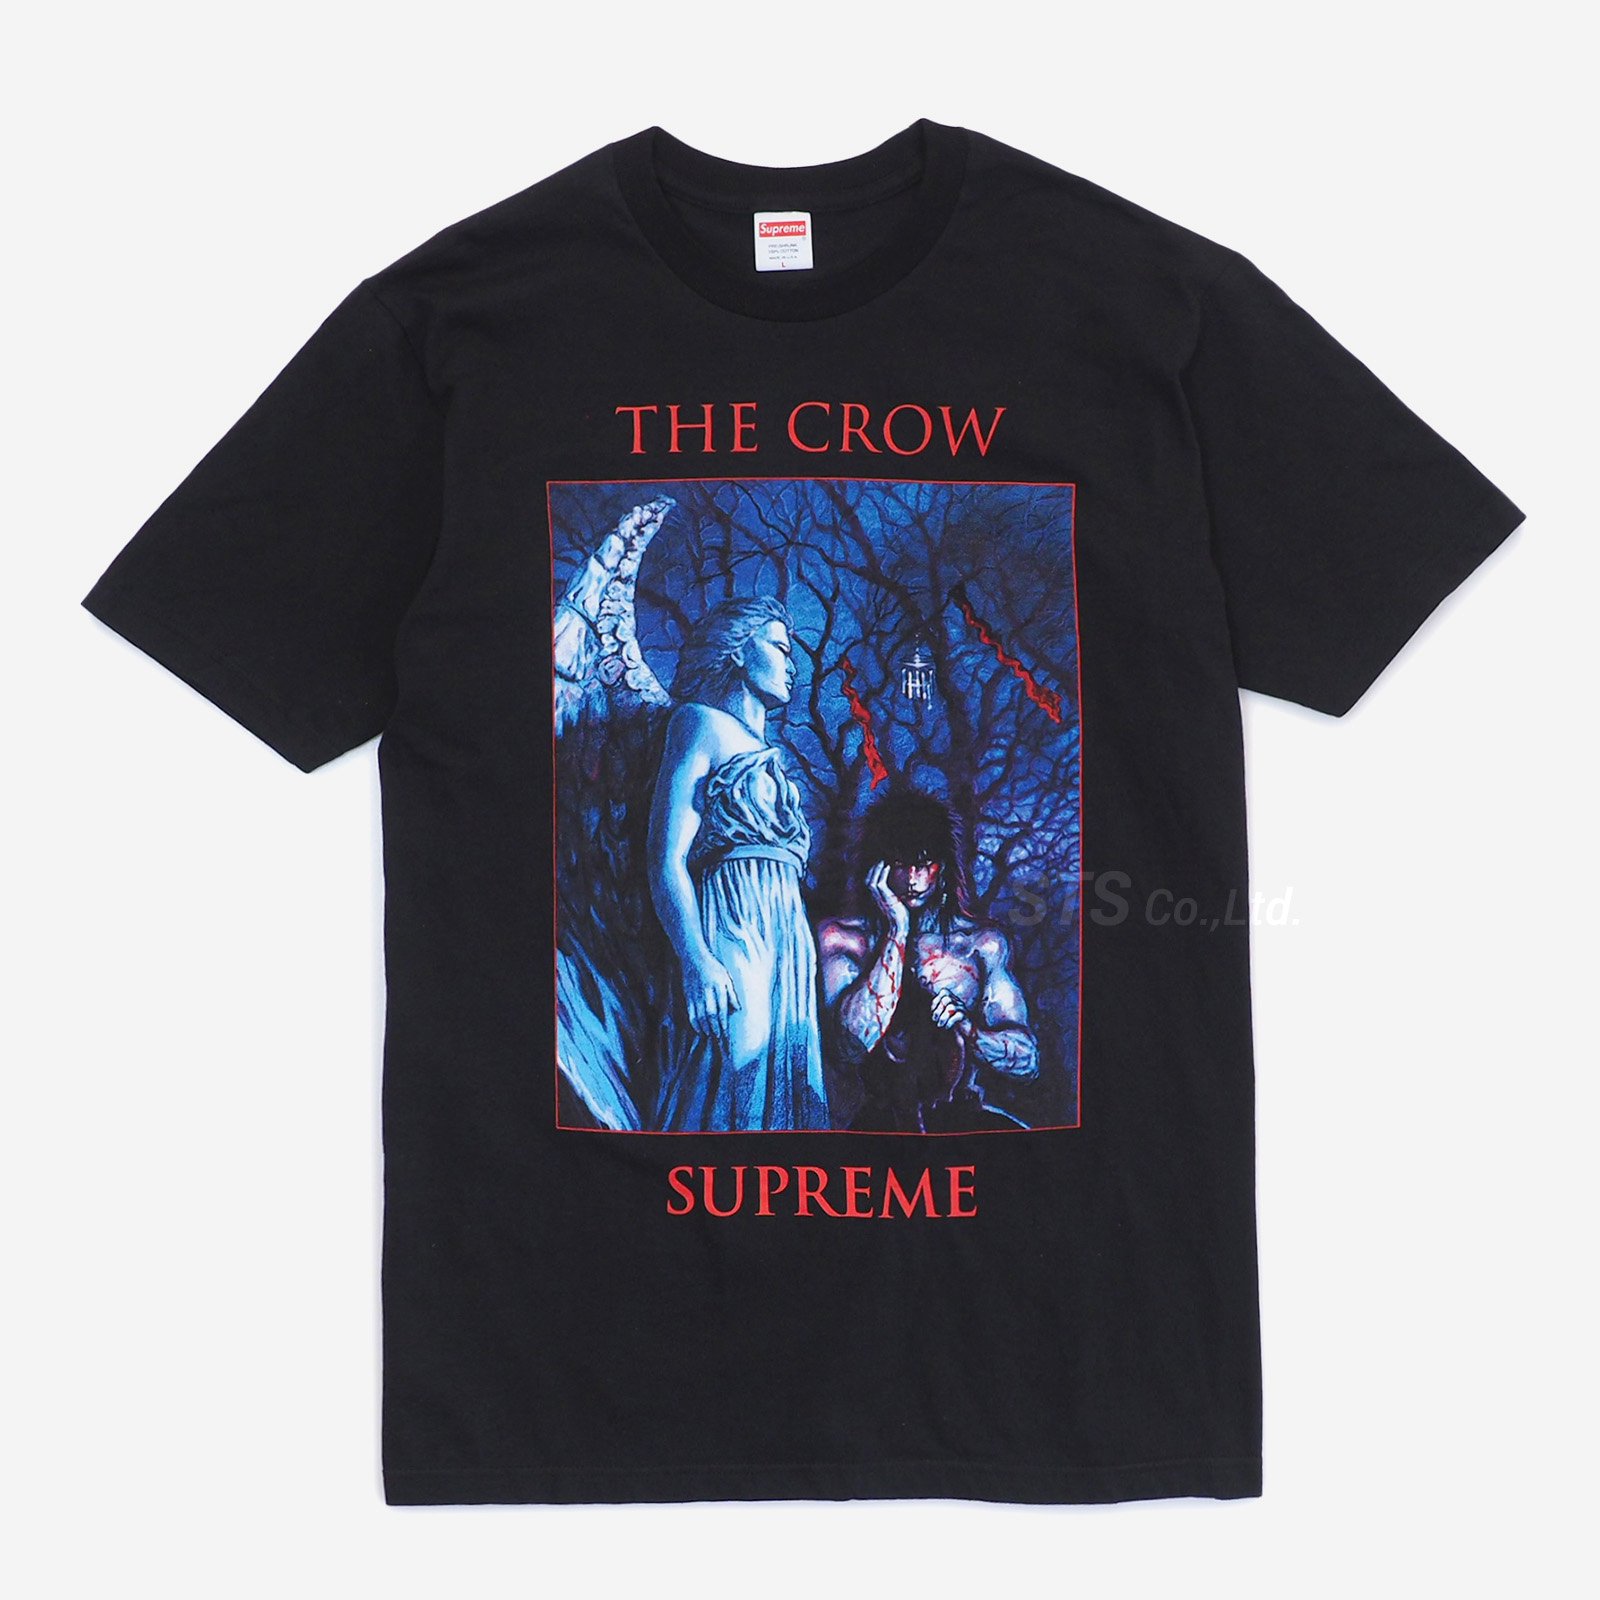 Supreme/The Crow Tee - ParkSIDER